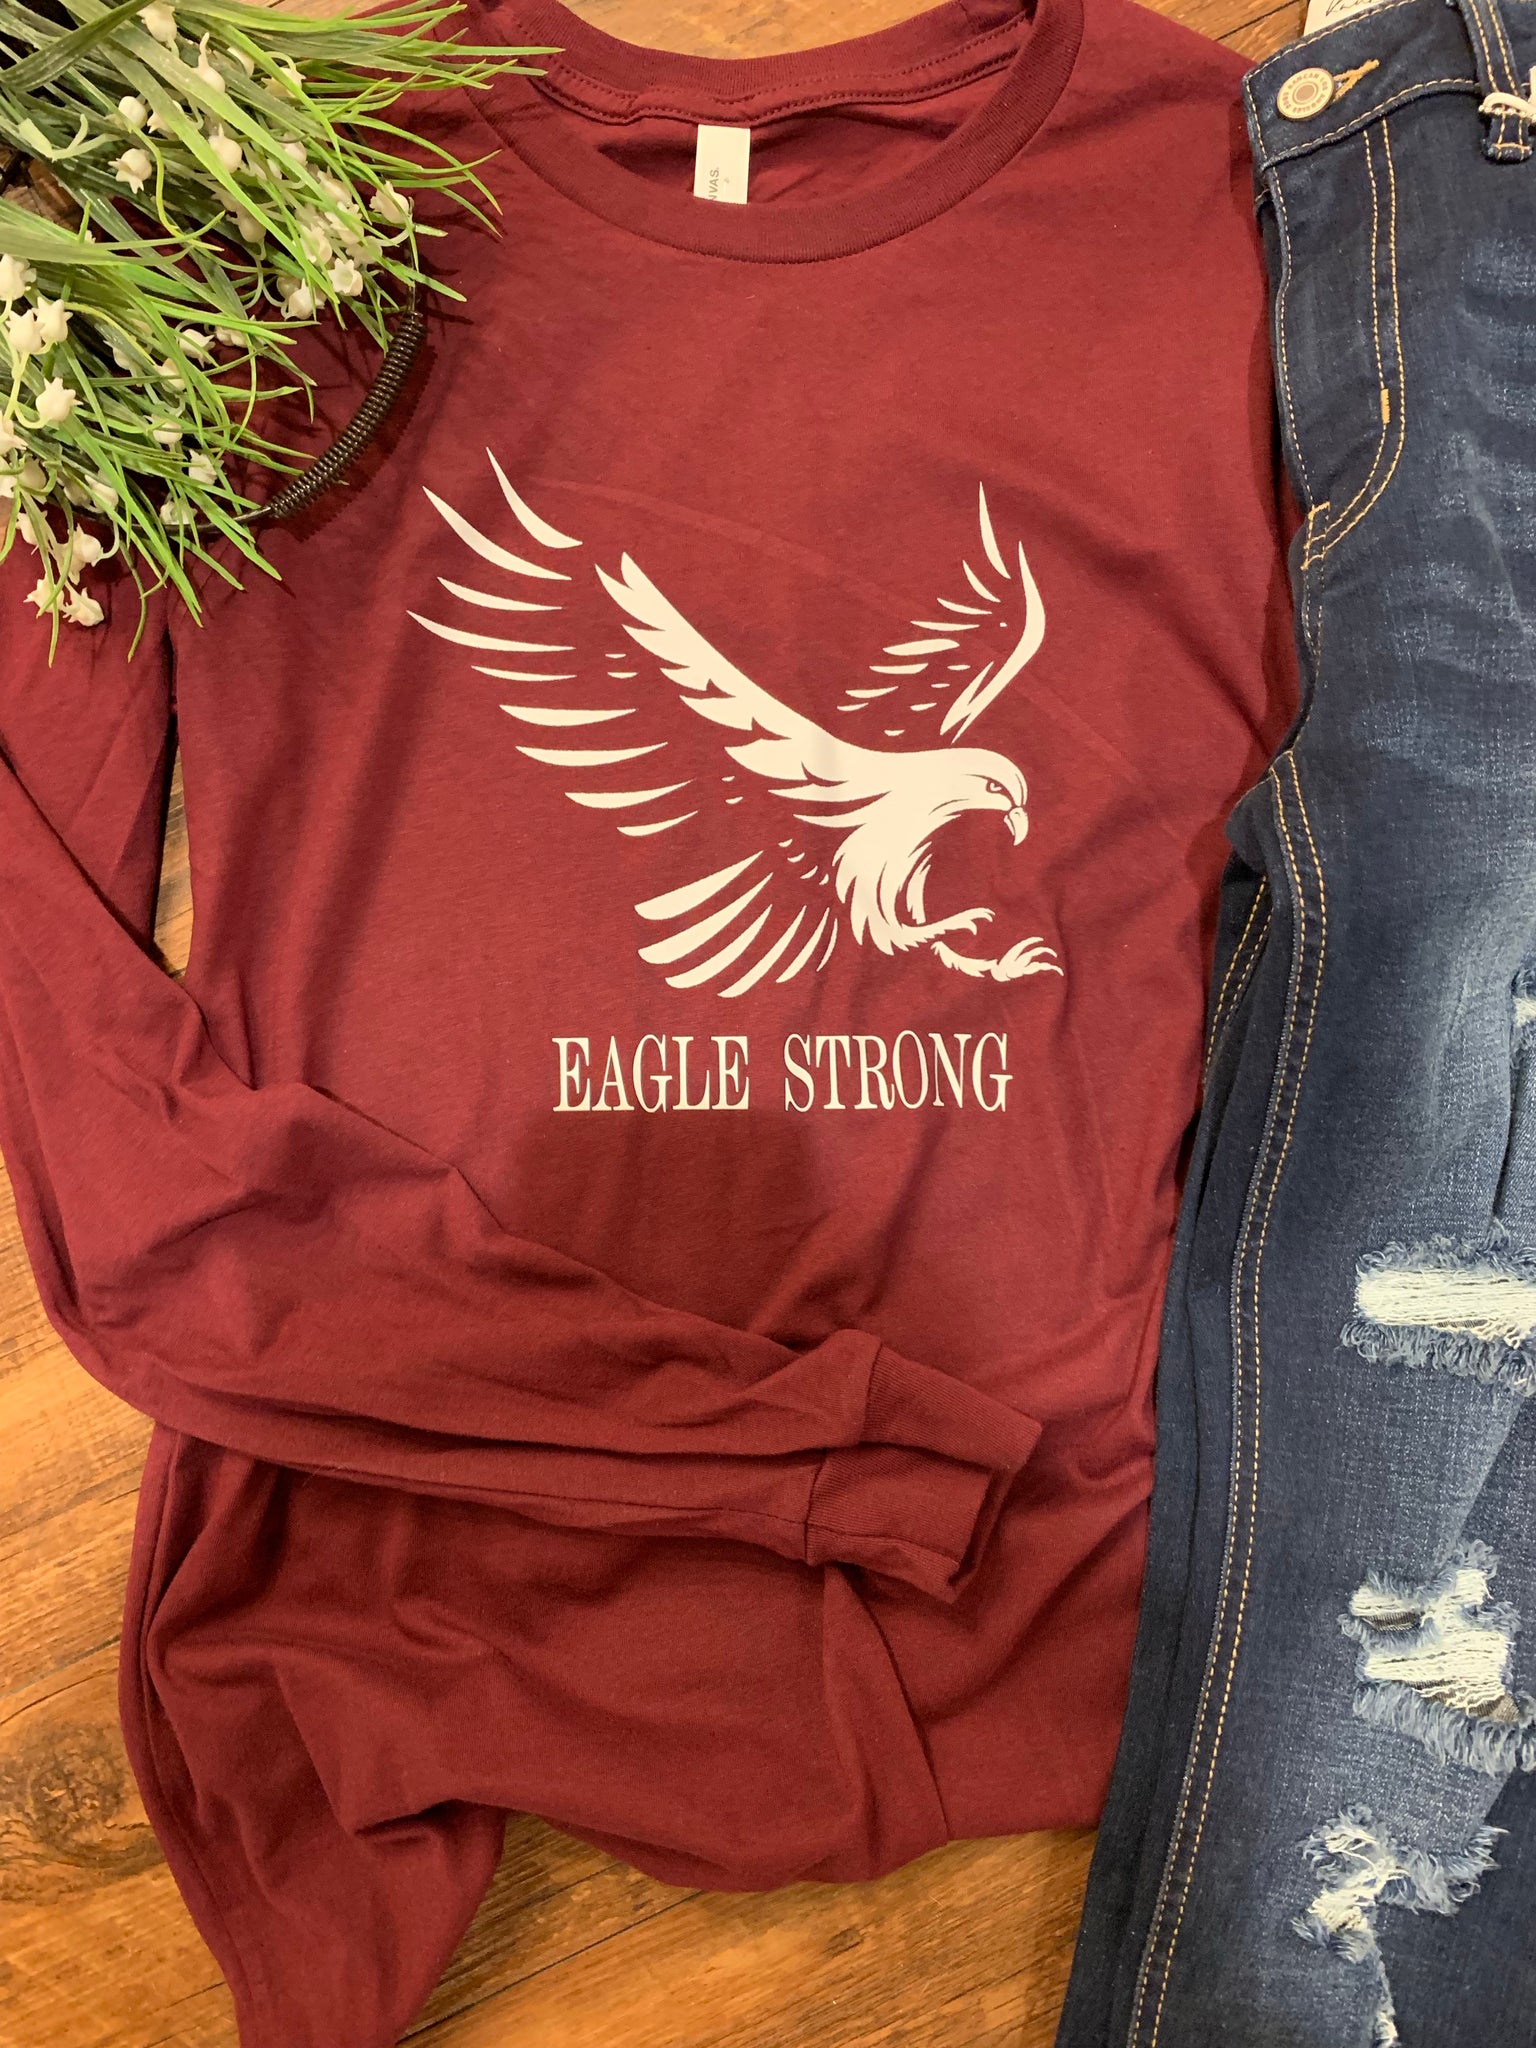 Eagle Strong graphic tee